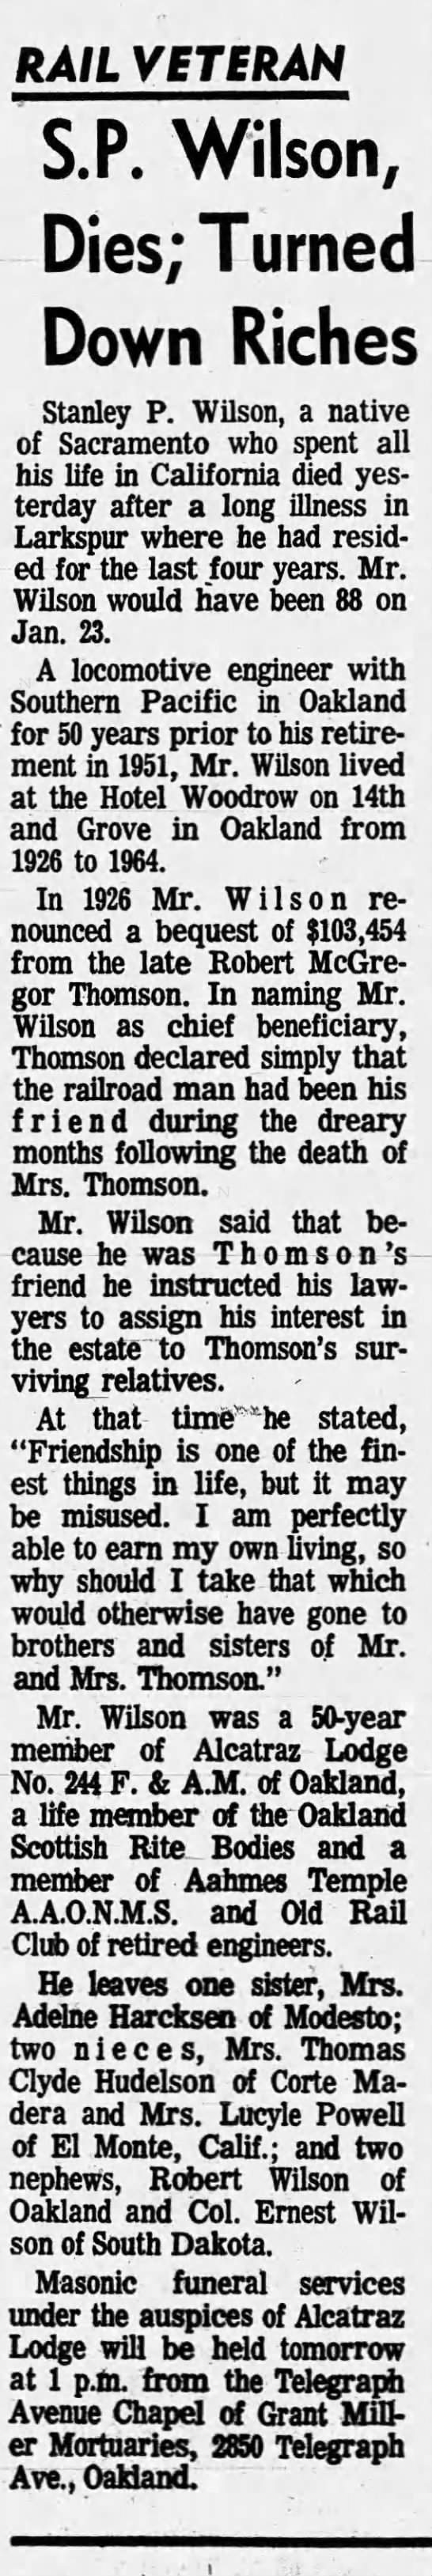 Obituary for S.P. Wilson - lived at Hotel Woodrow 1926-1954 - 